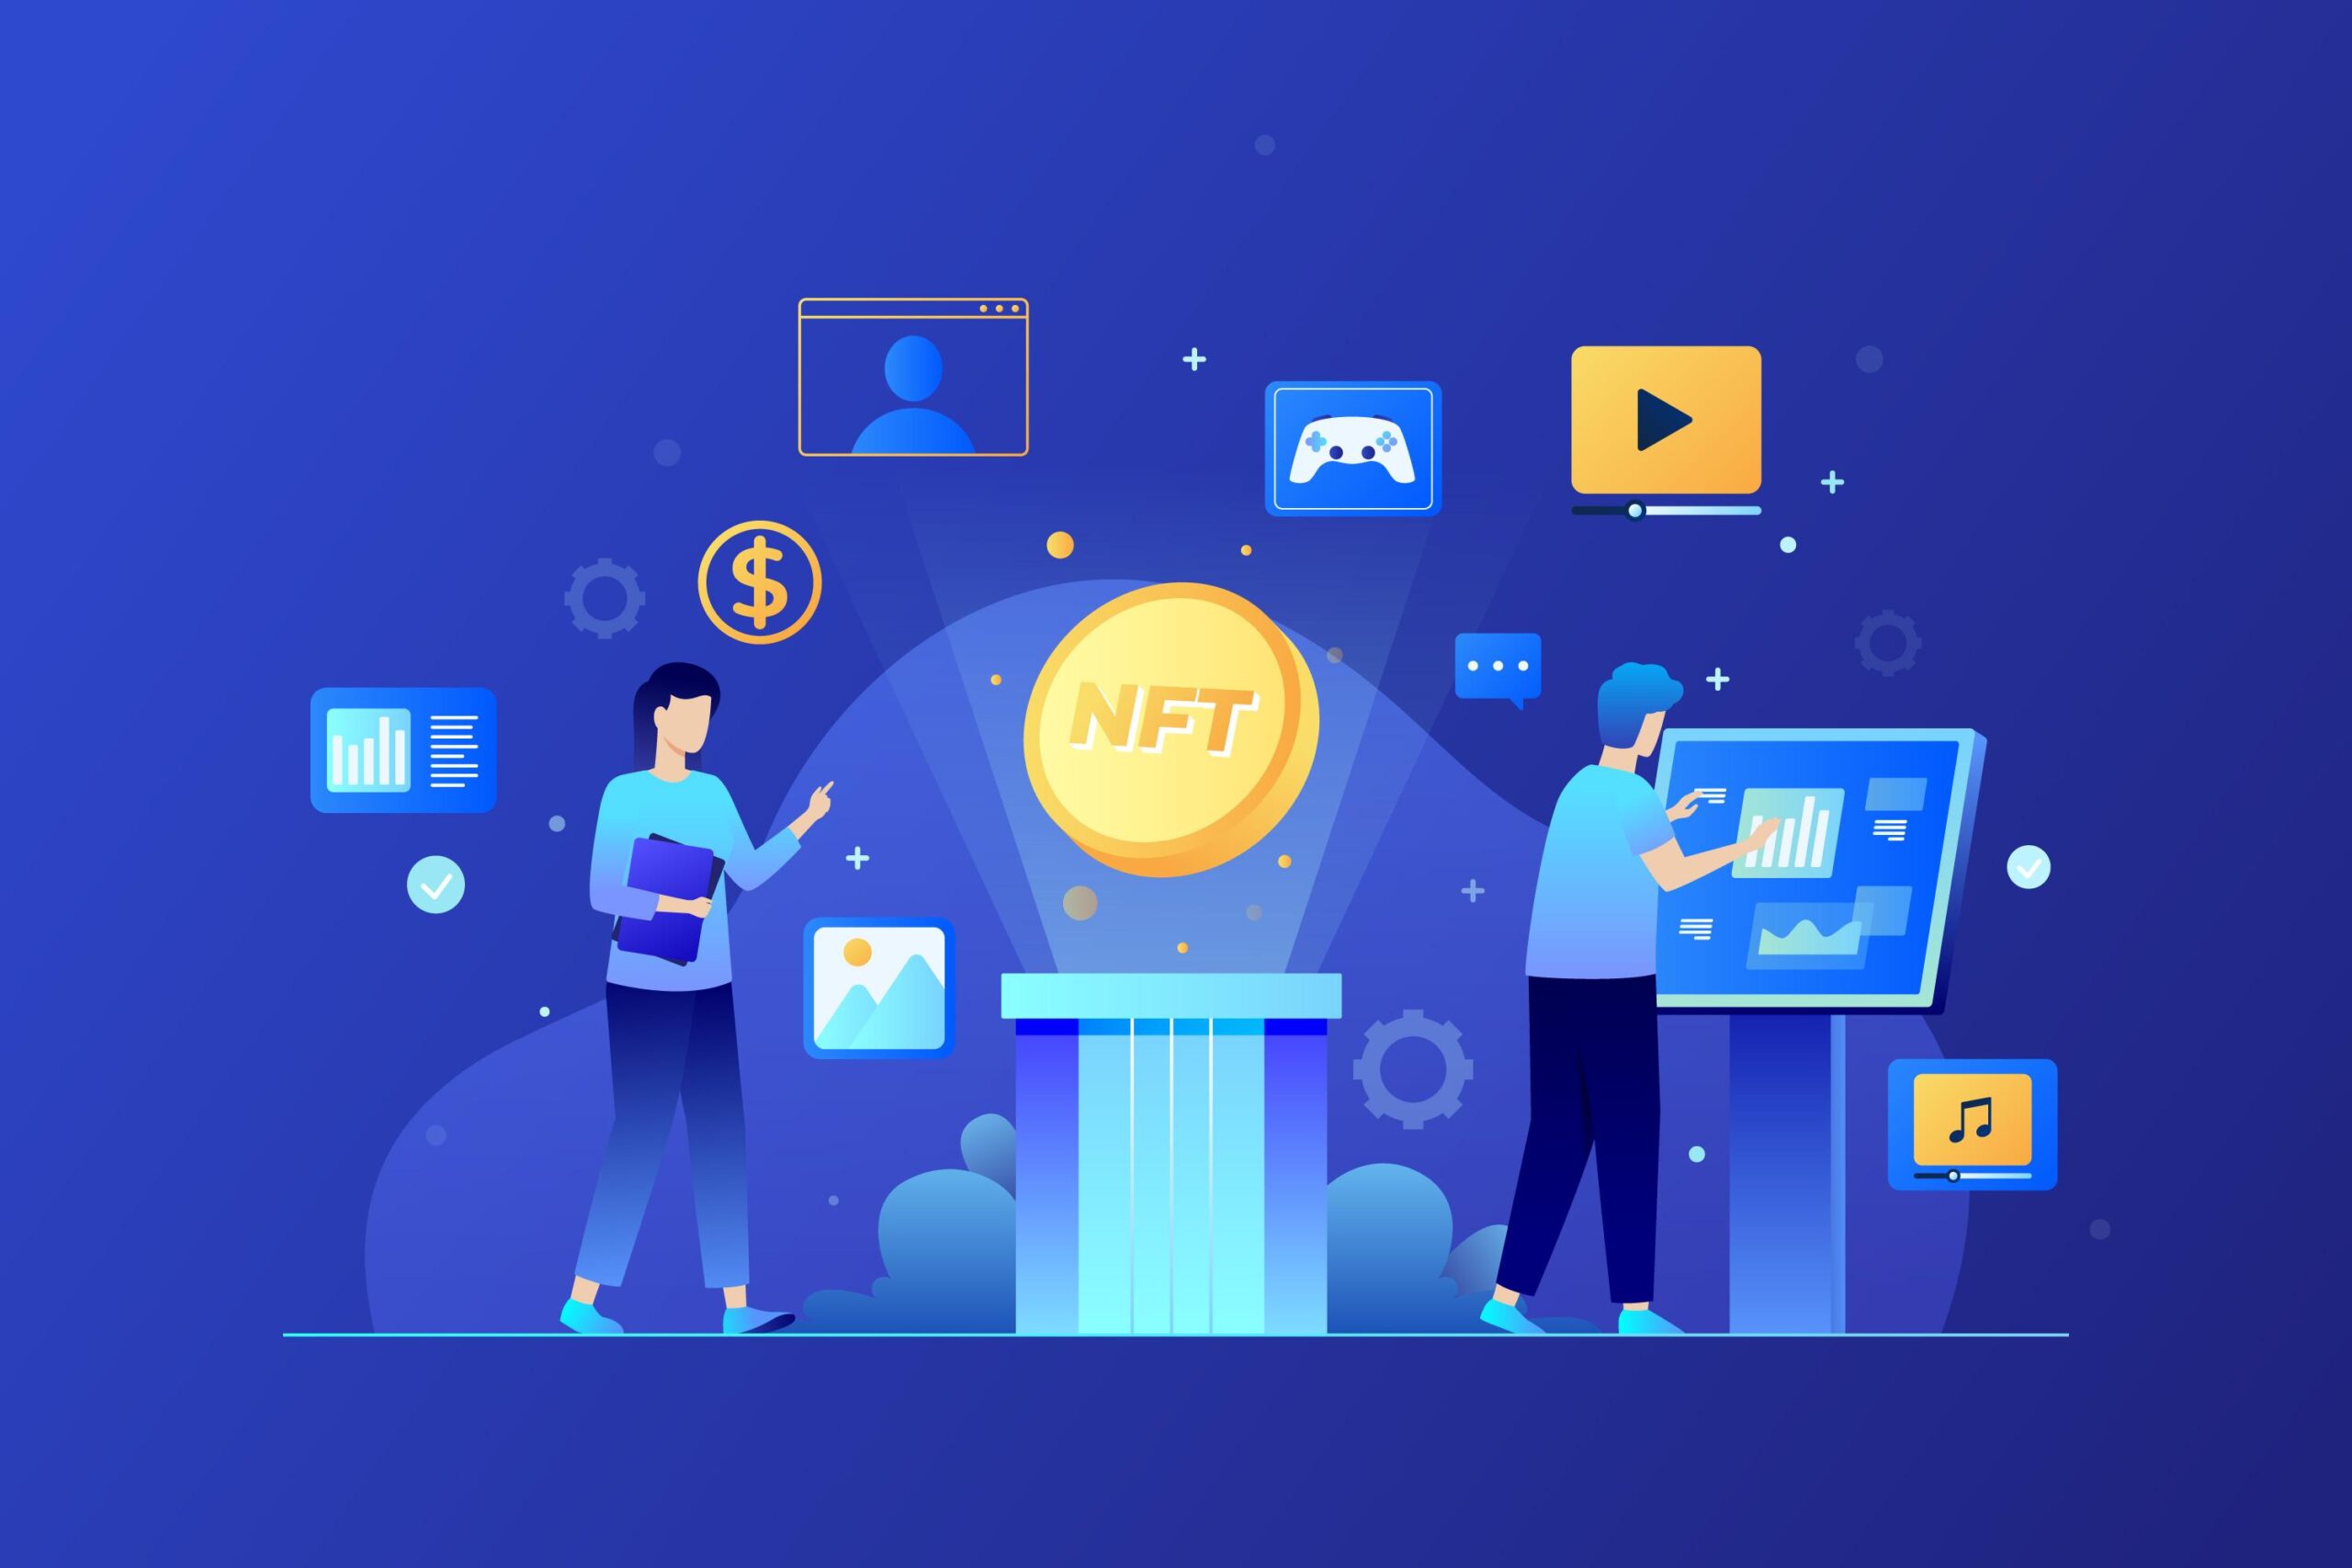 Singapore-based NFT startup GuardianLink raises USD 12 million in Series A  round - VCBay News Breaking News